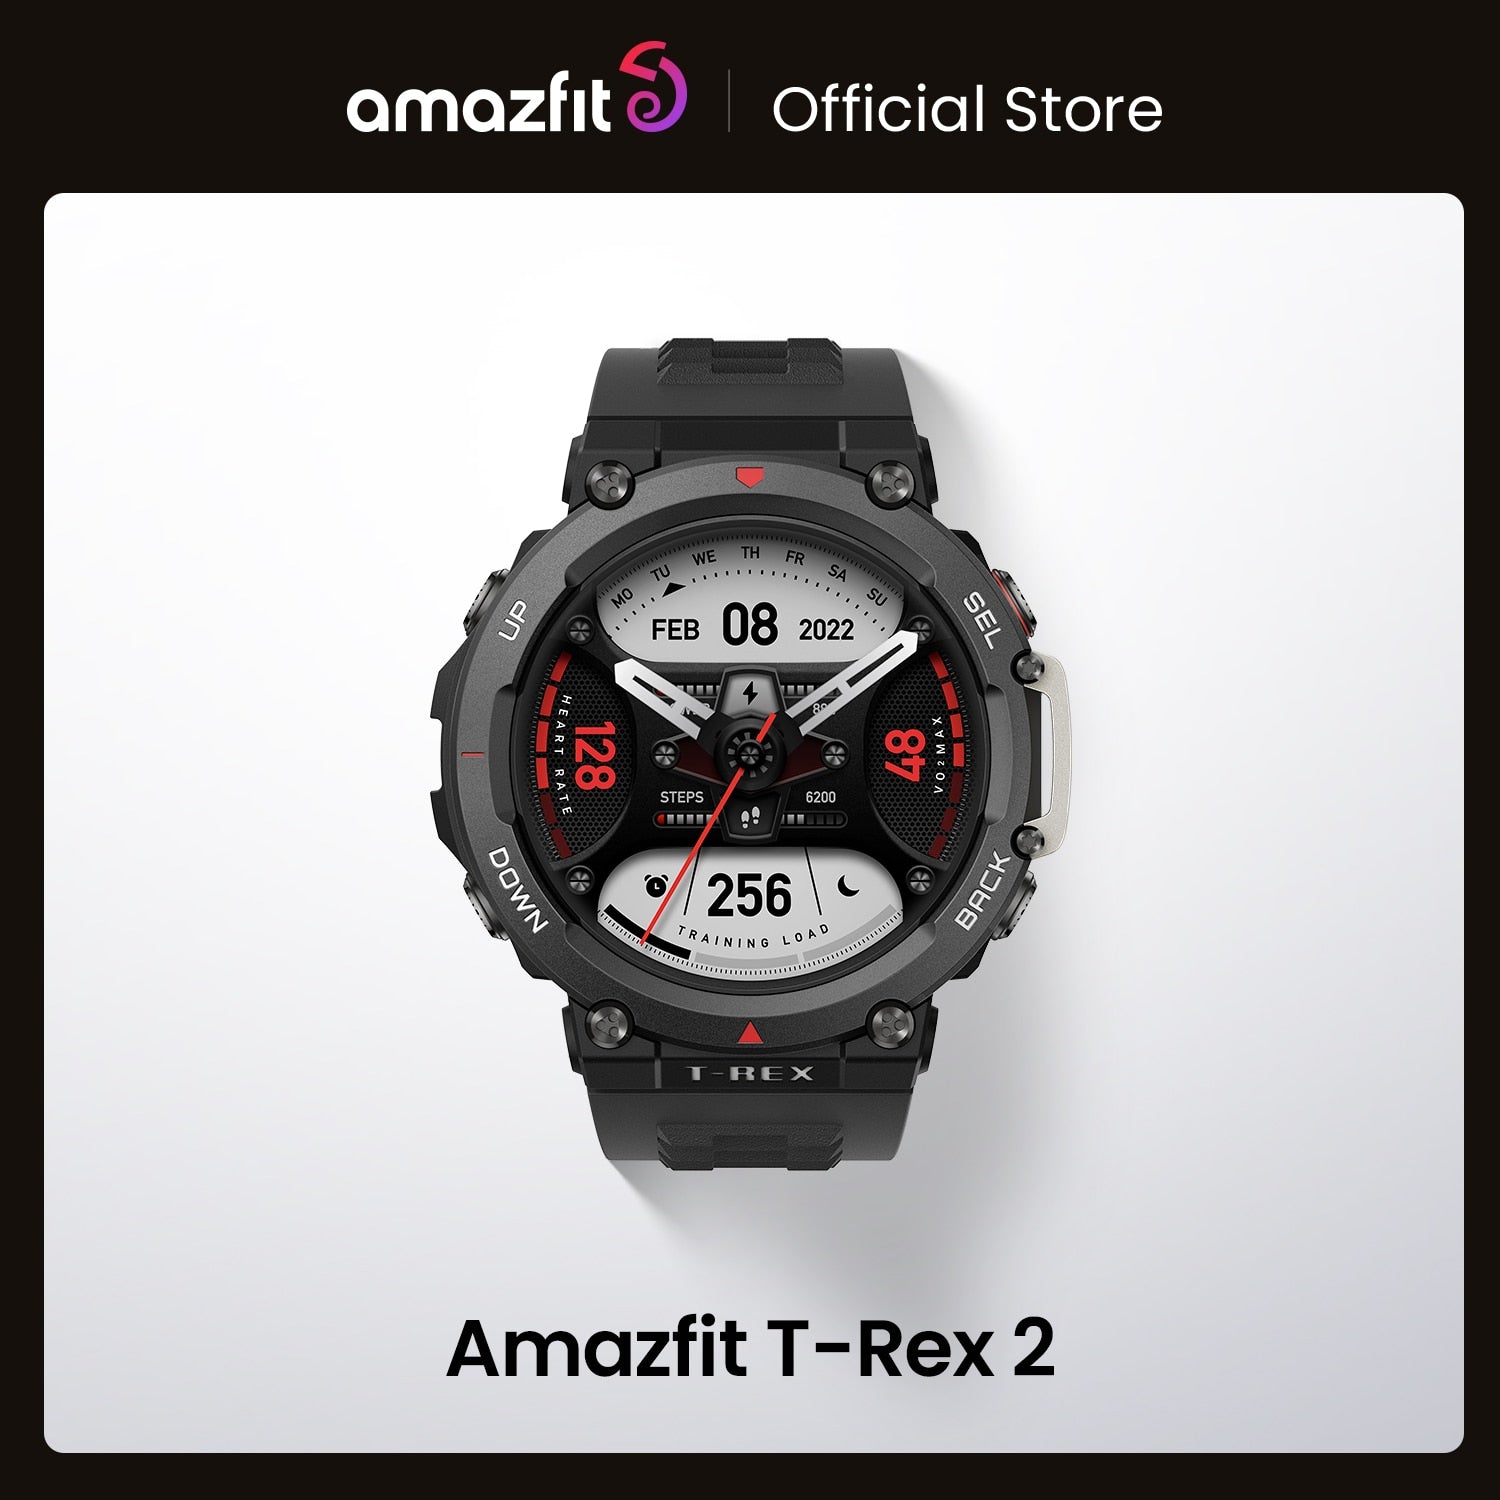 Amazfit T-Rex 2 Rugged Outdoor GPS Smartwatch 24-day Battery Life 150+Built-in Sports Modes Smart Watch For Android iOS